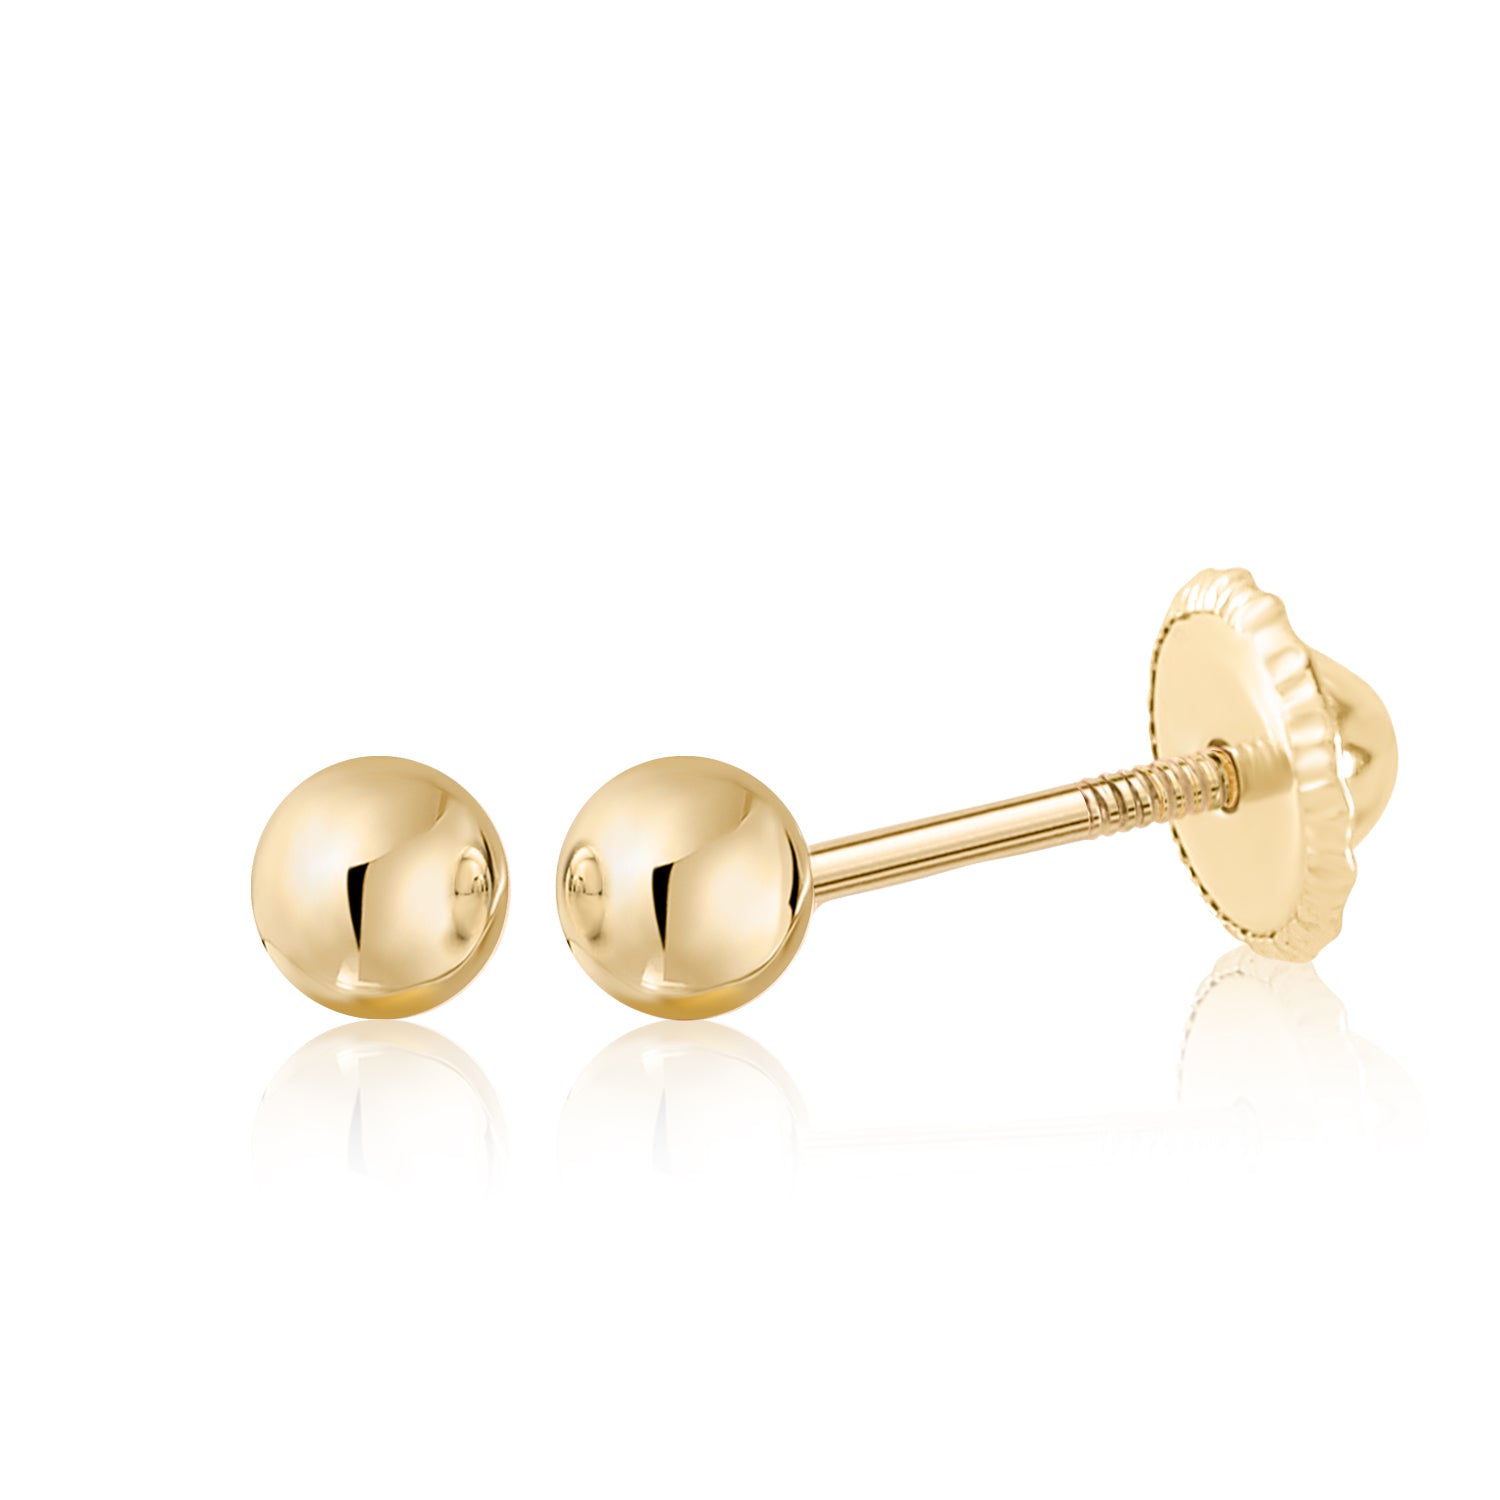 14K Yellow Gold Classic Ball Stud Earrings with Screwbacks (Unisex) 7mm